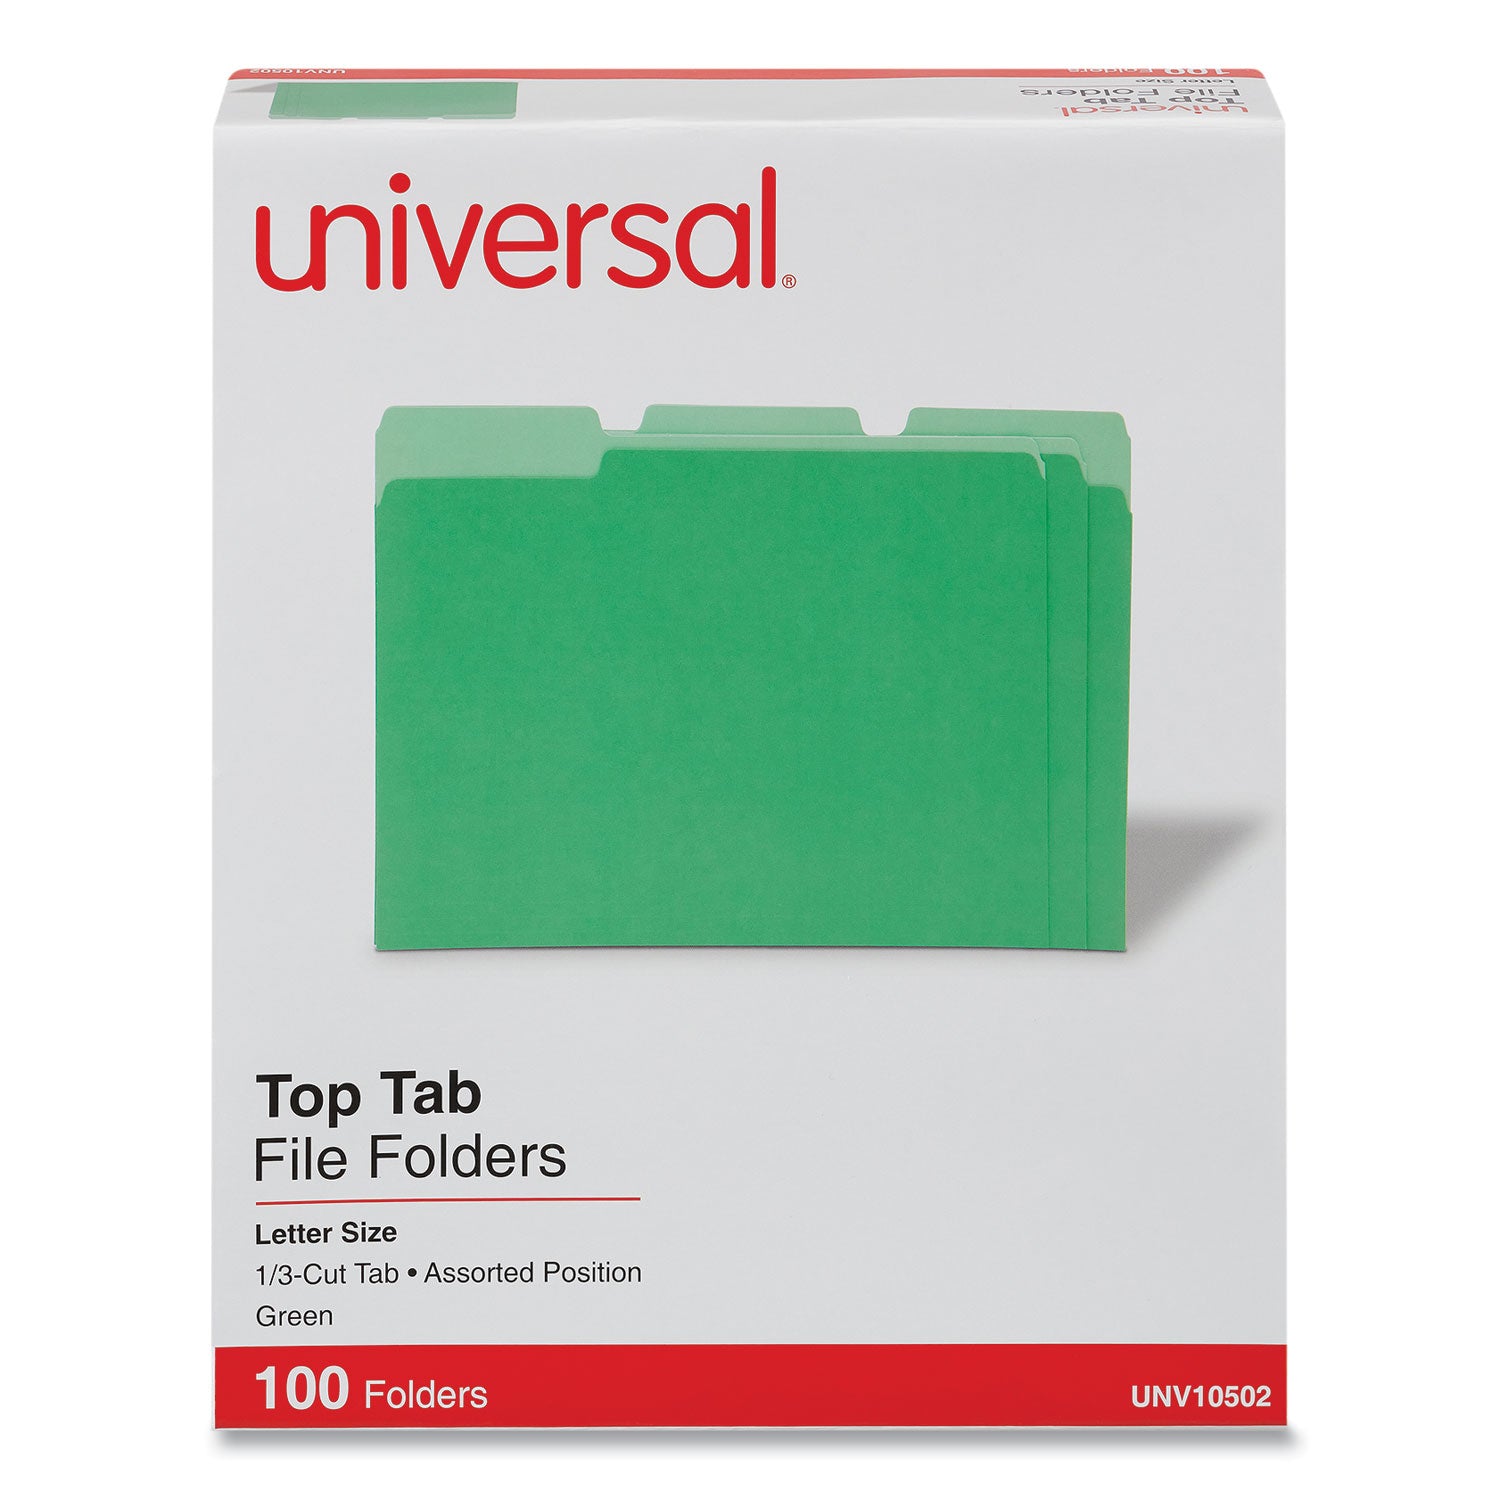 Deluxe Colored Top Tab File Folders, 1/3-Cut Tabs: Assorted, Letter Size, Green/Light Green, 100/Box - 